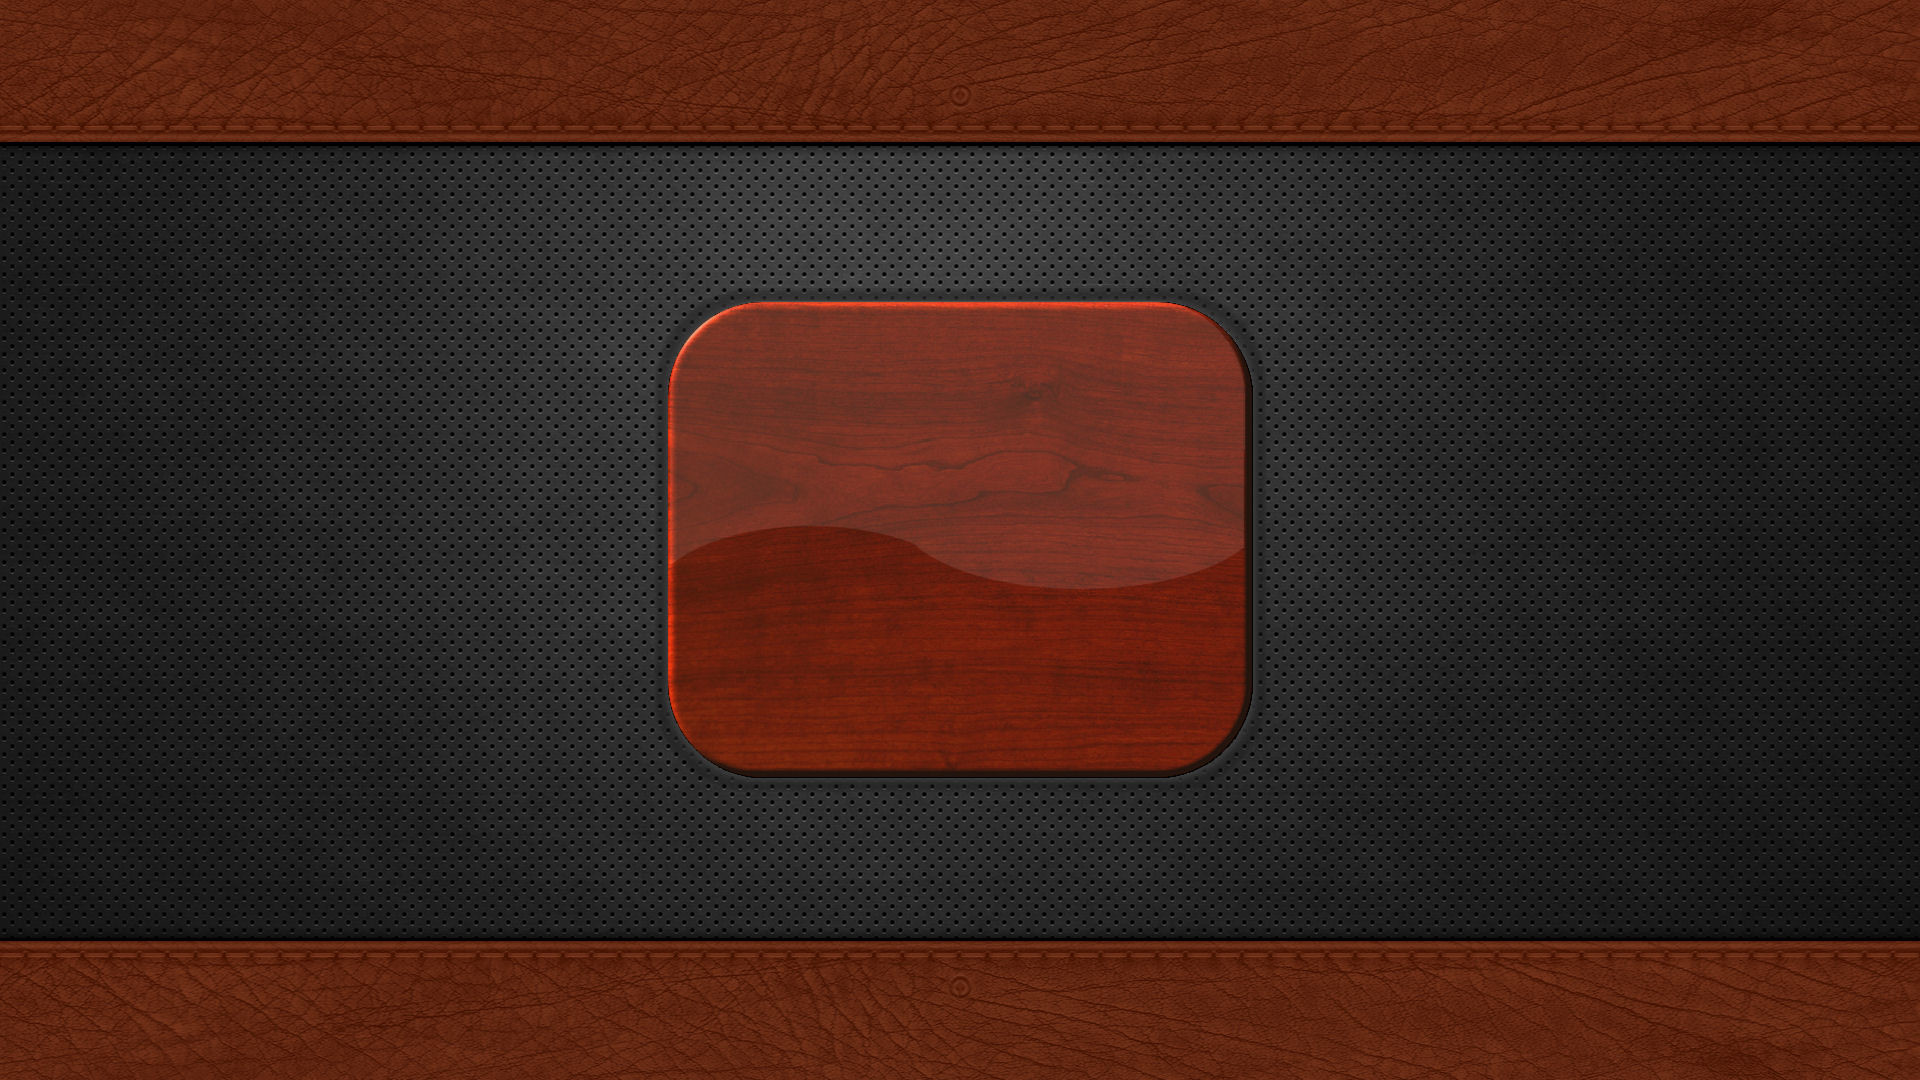 1920x1080 ... Login Screen: Metal Holes, Leather and Wood by EricRobichaud73